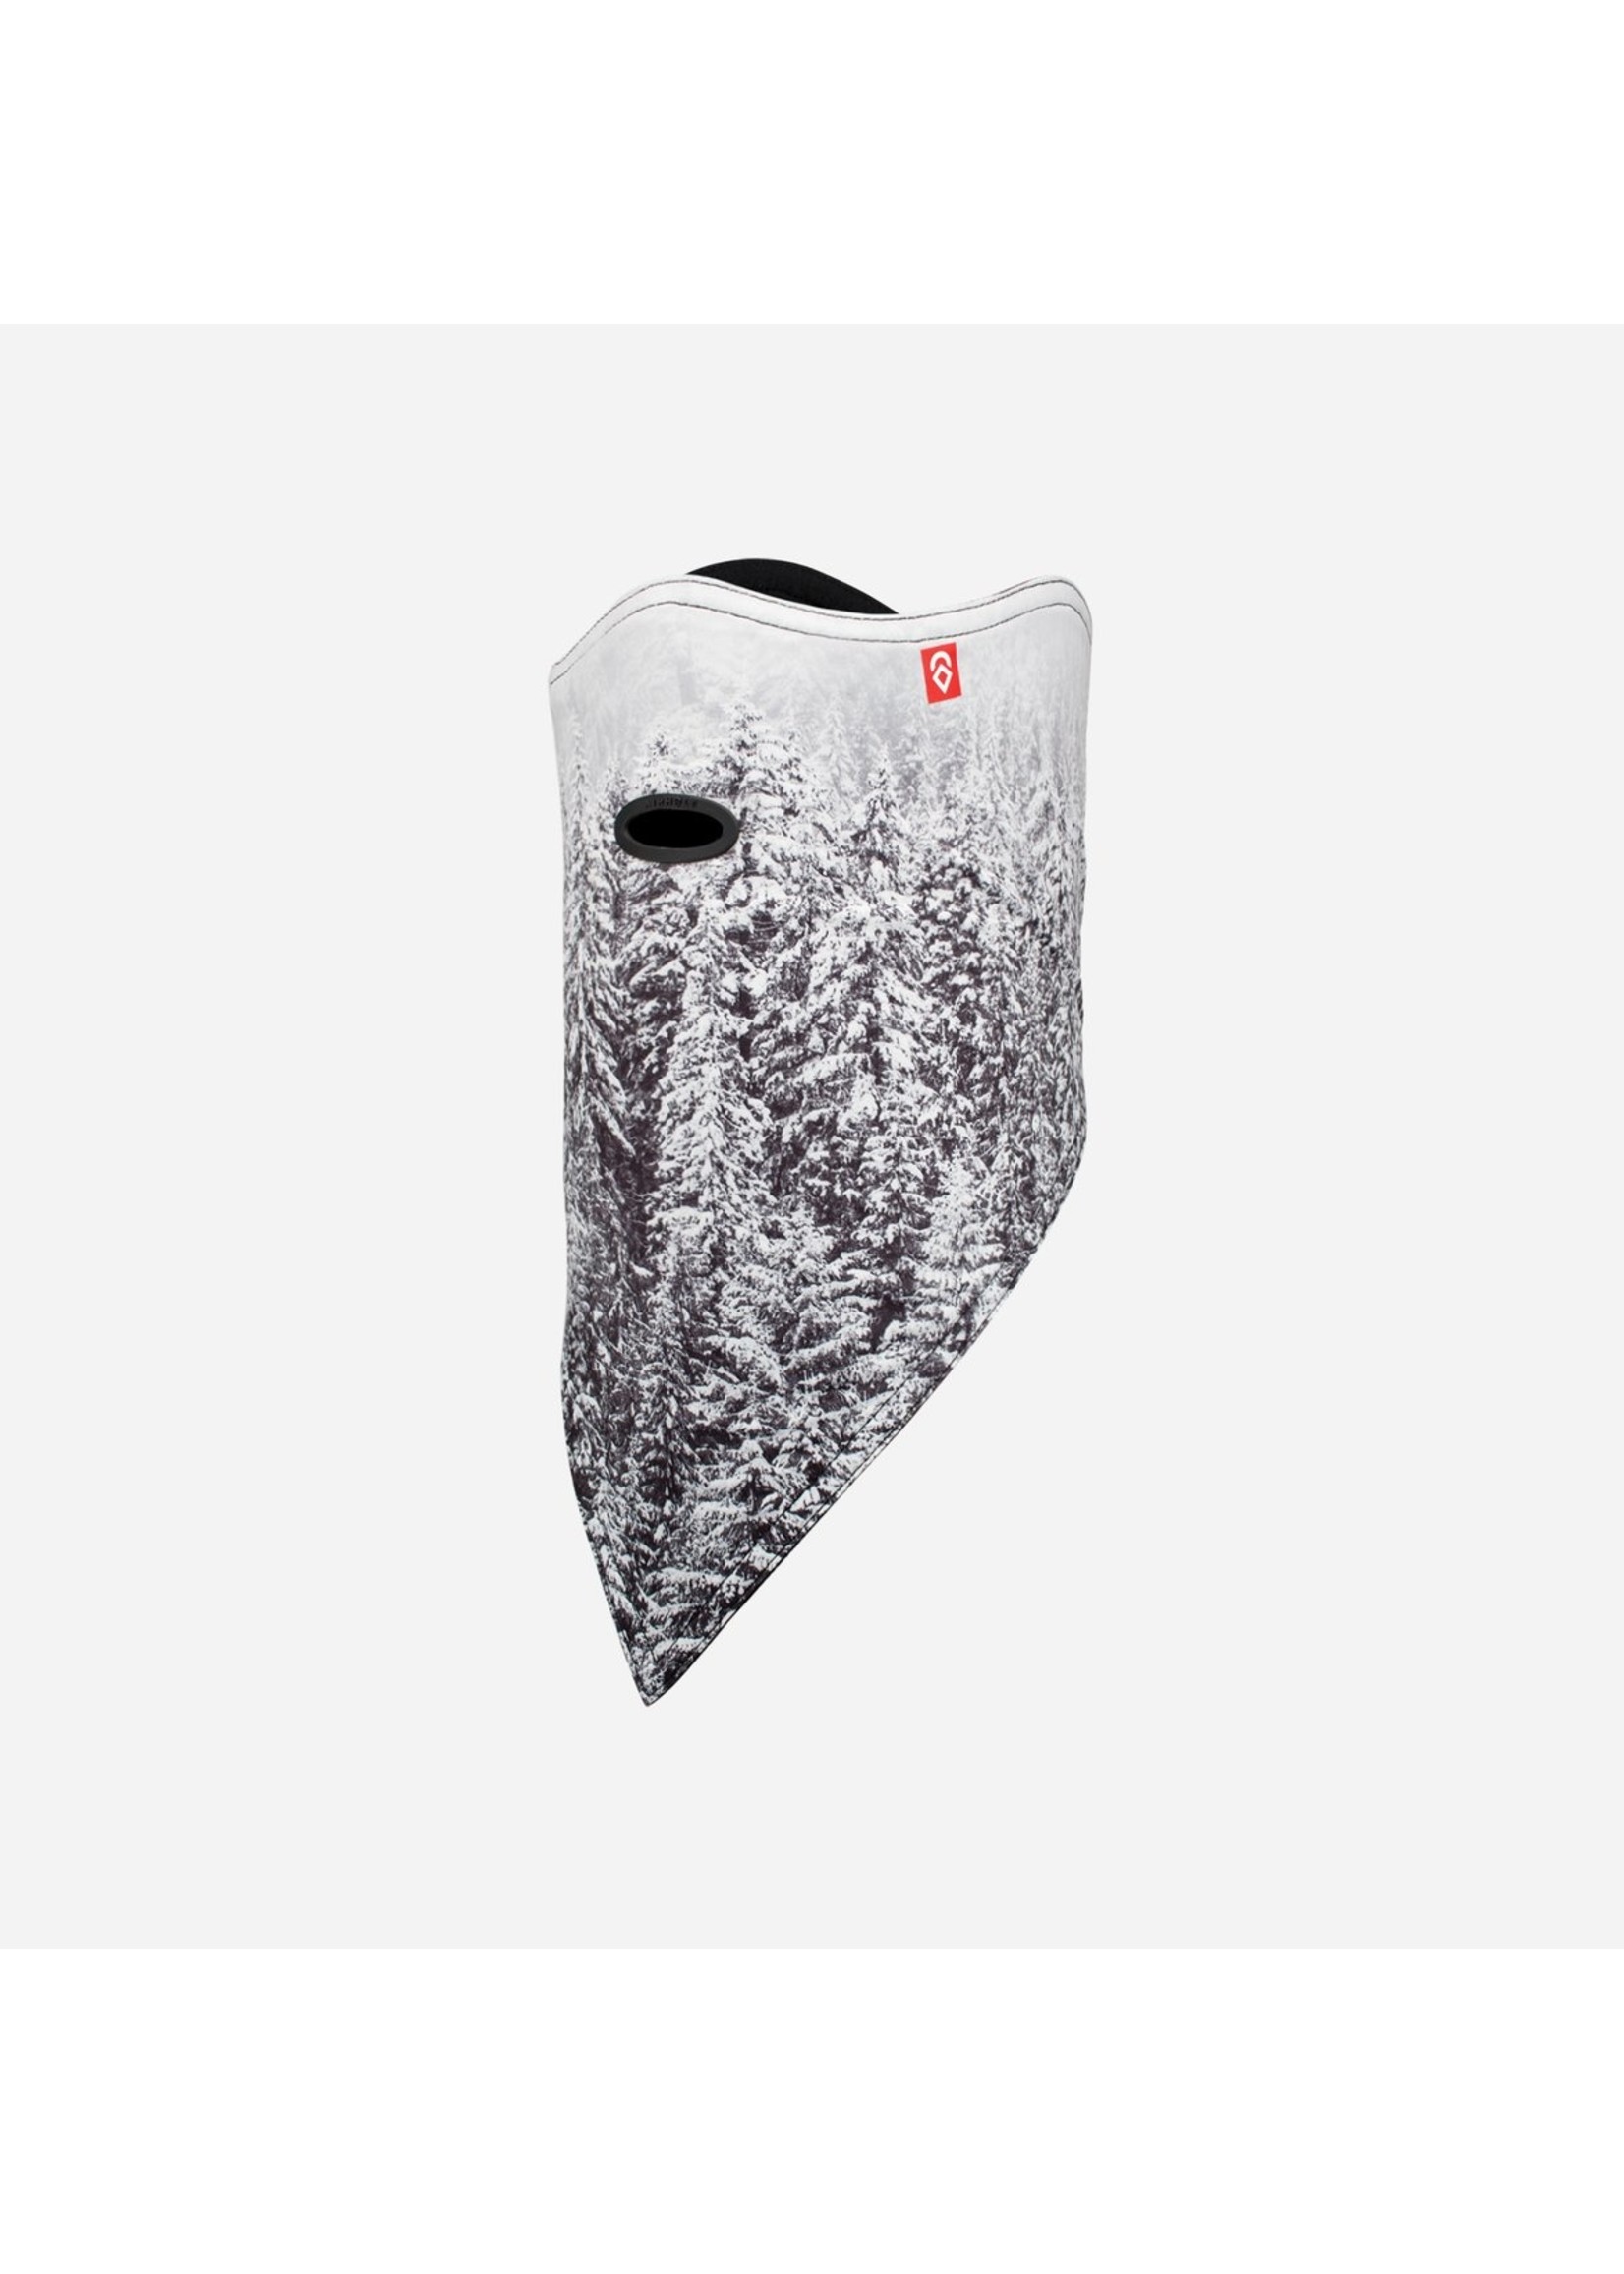 Airhole FACEMASK STANDARD 2 LAYER